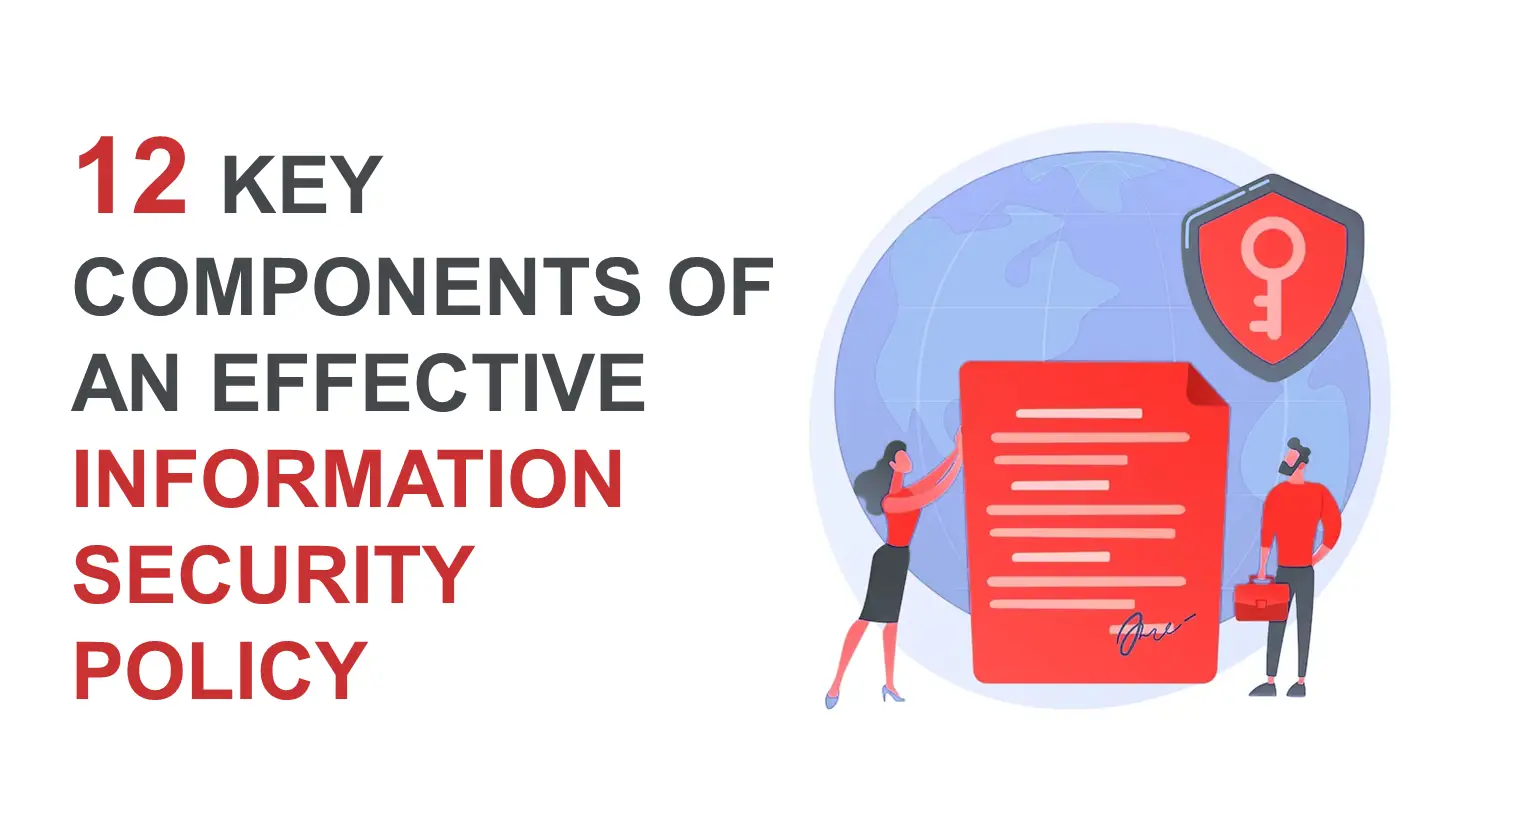 12 Key Components of an Effective Information Security Policy